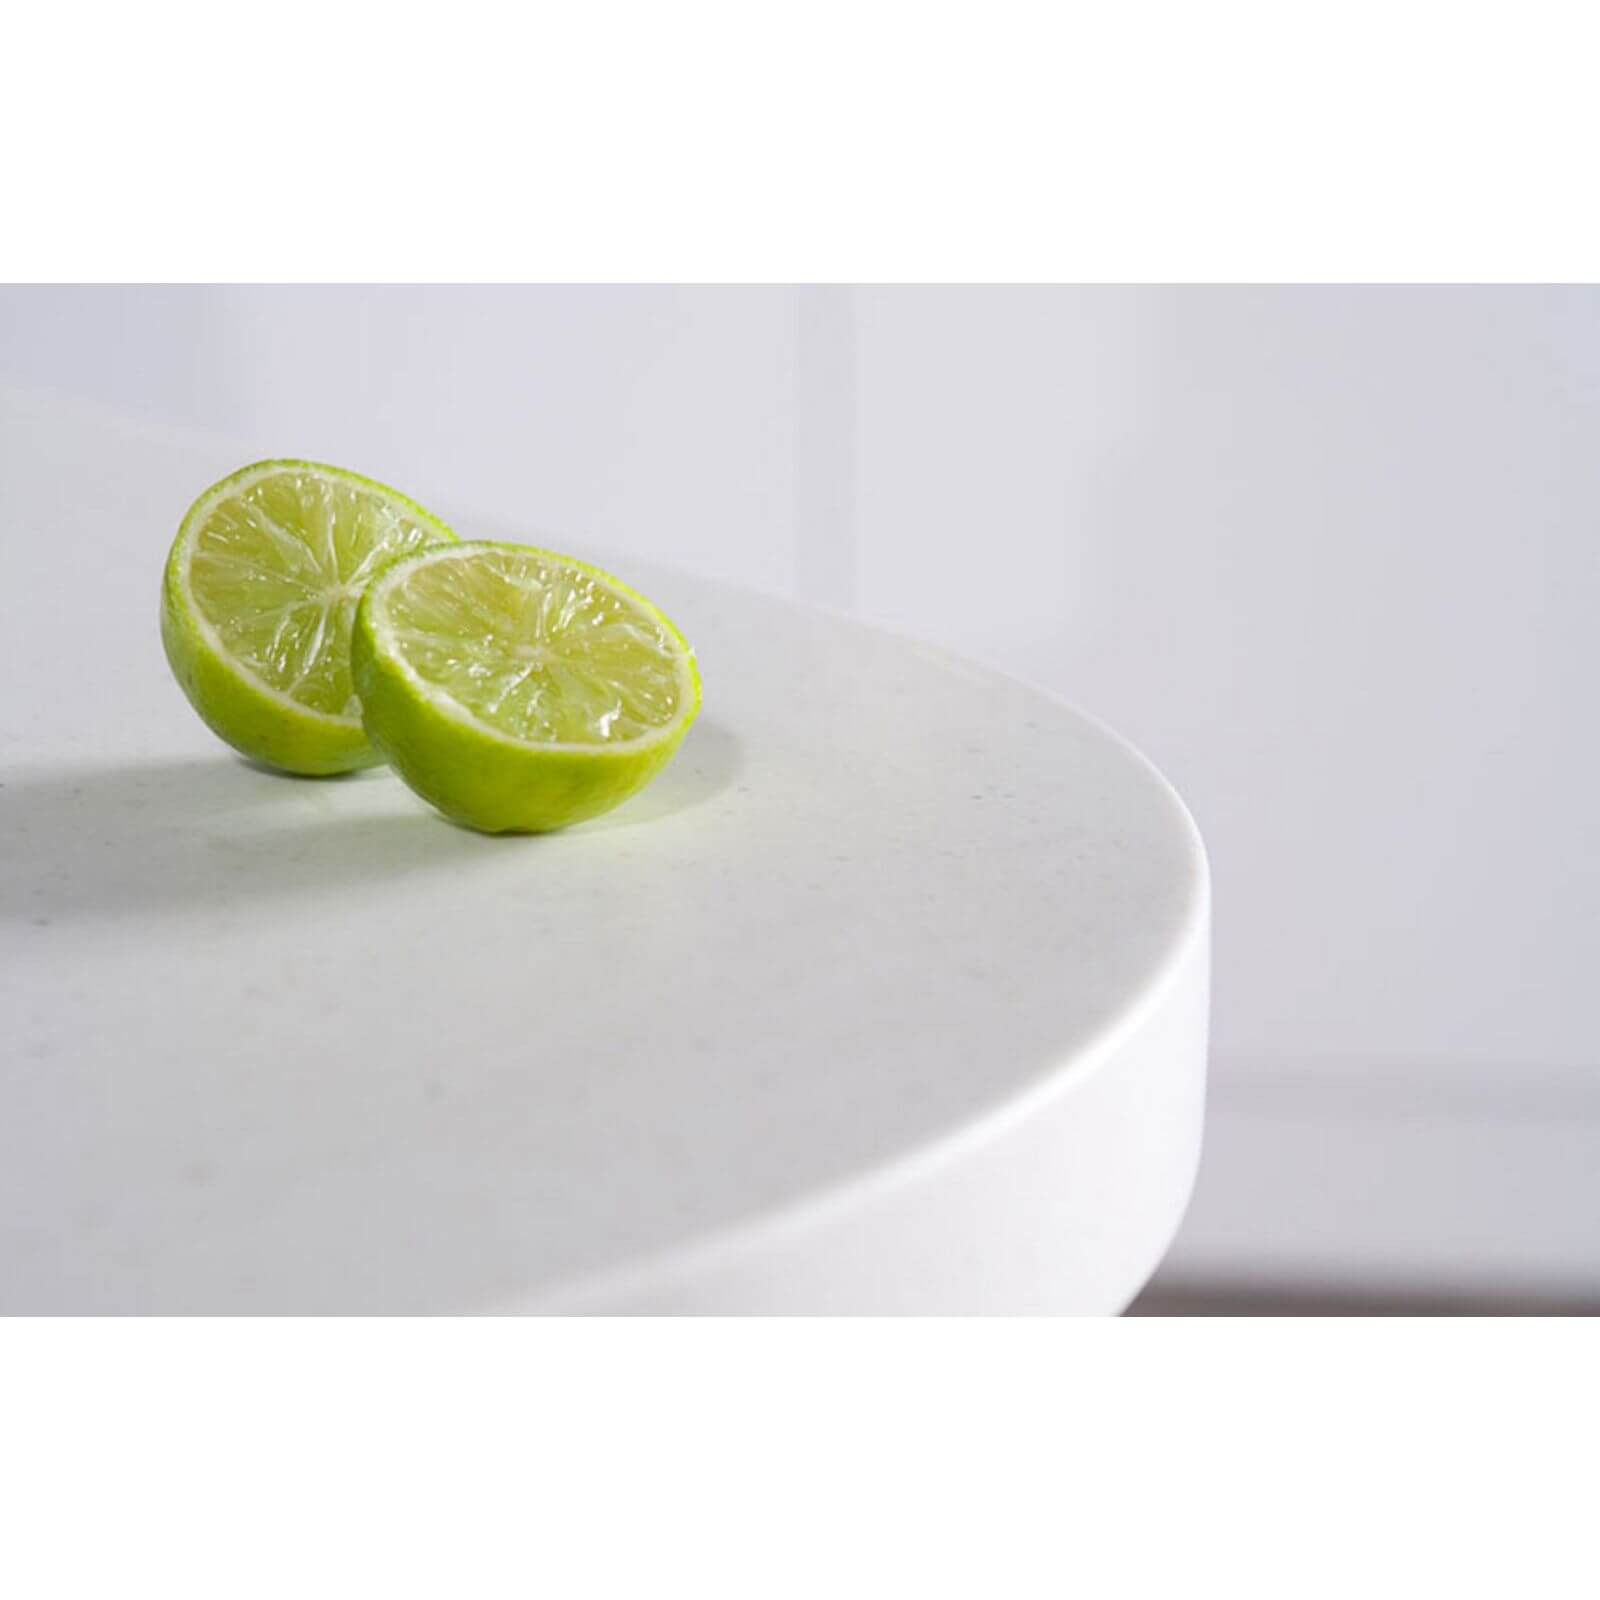 Maia Calcite Kitchen Sink Worktop - Acrylic 1.5 Duo Right Hand Bowl - 3600 x 650 x 42mm